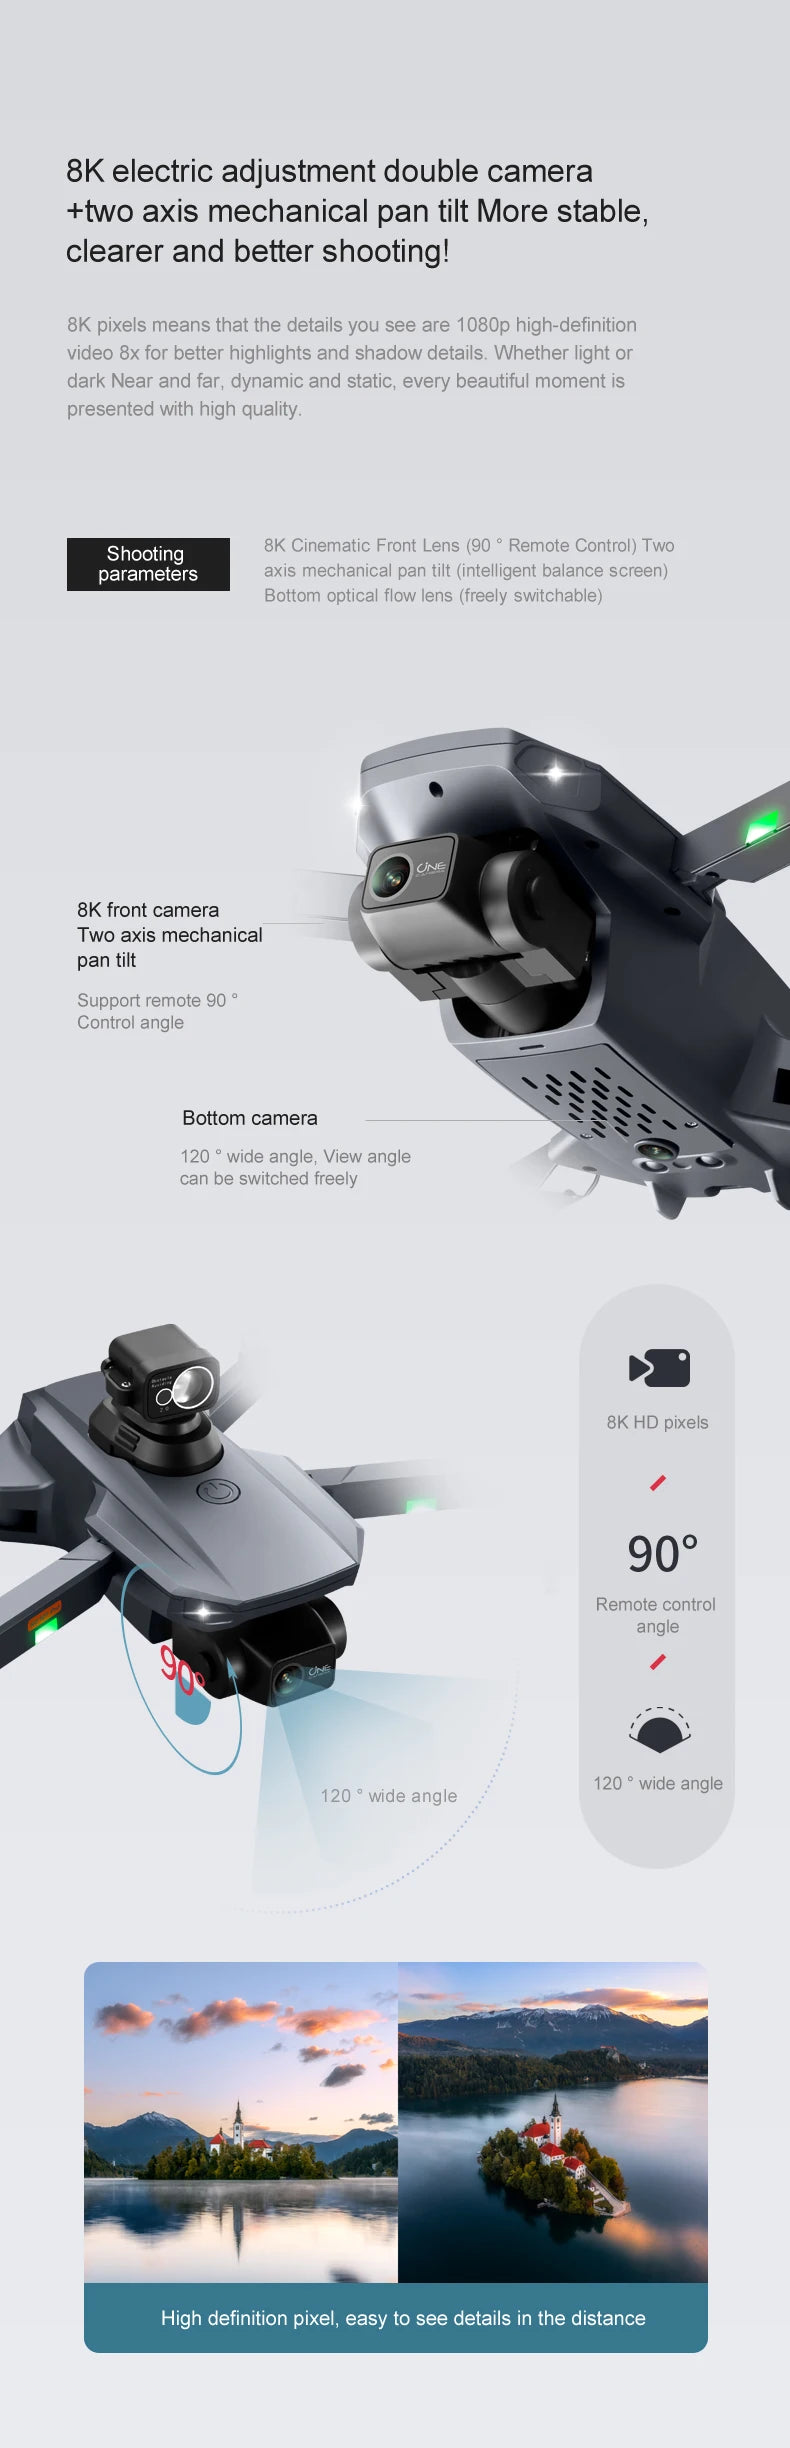 RG101 PRO Drone, 8K pixels means that the details you see are 1080p high-definition video